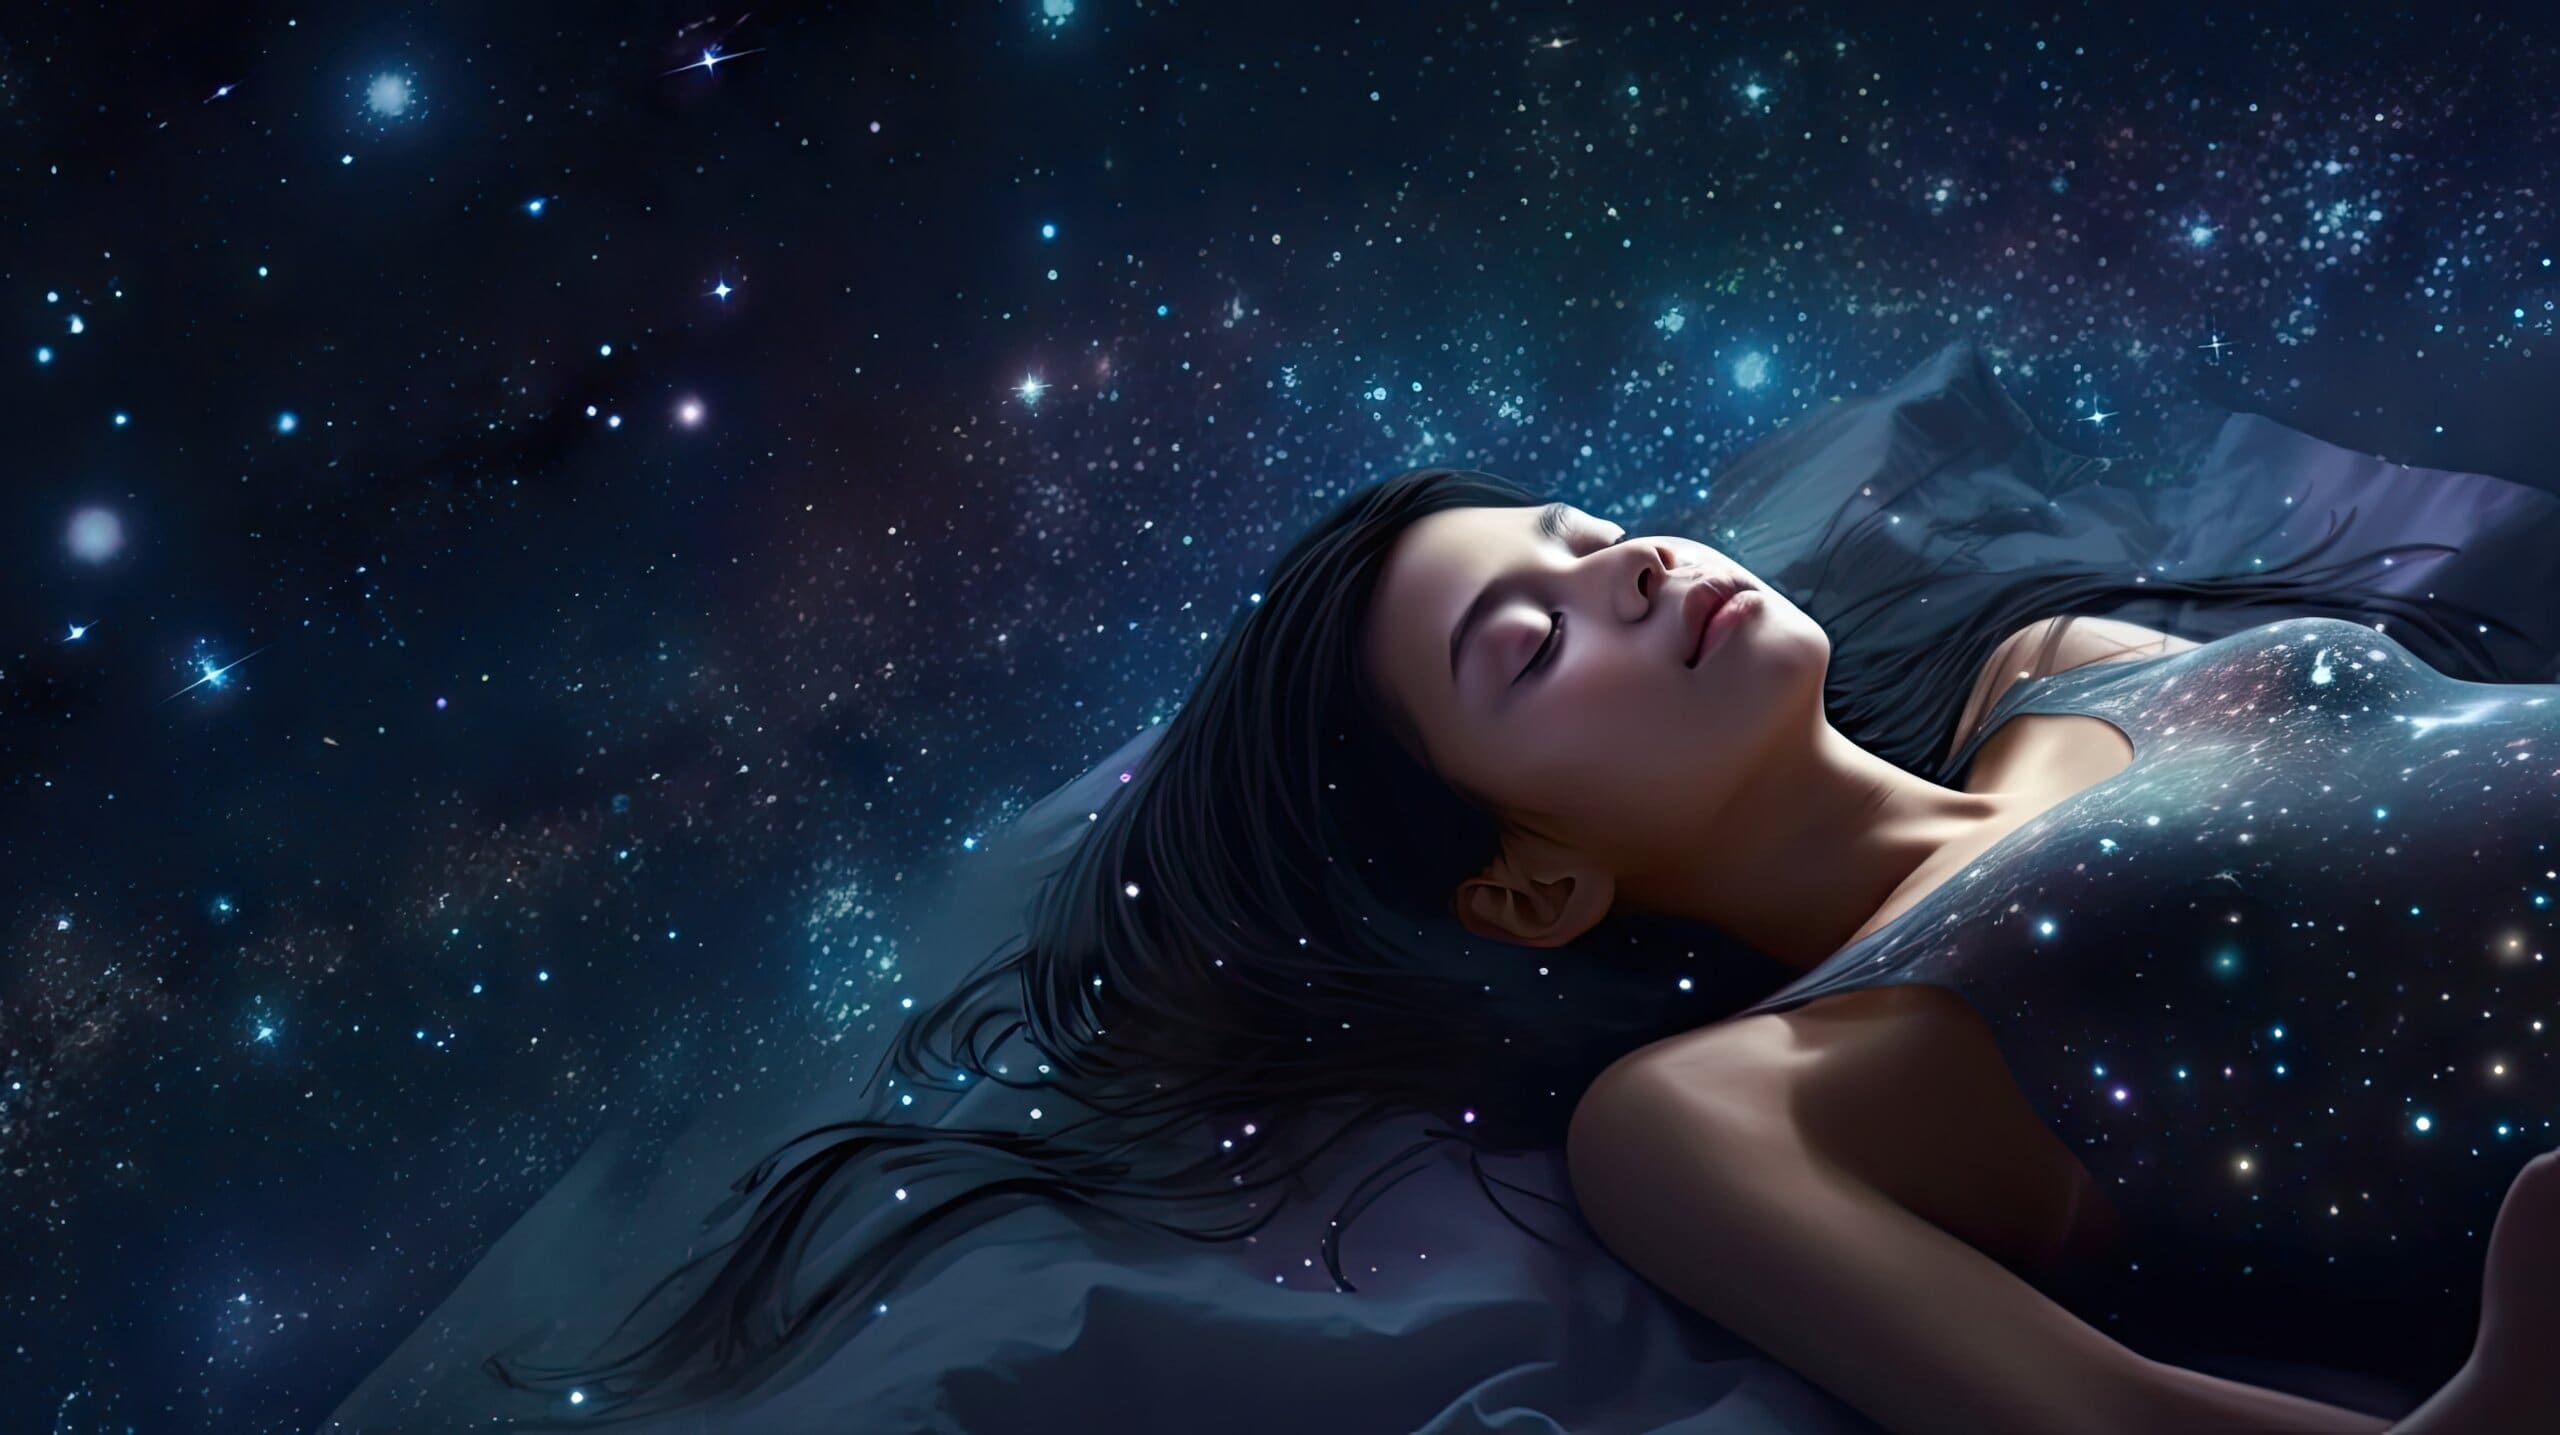 Young girl asleep with galaxy background all around her, and on her t shirt.